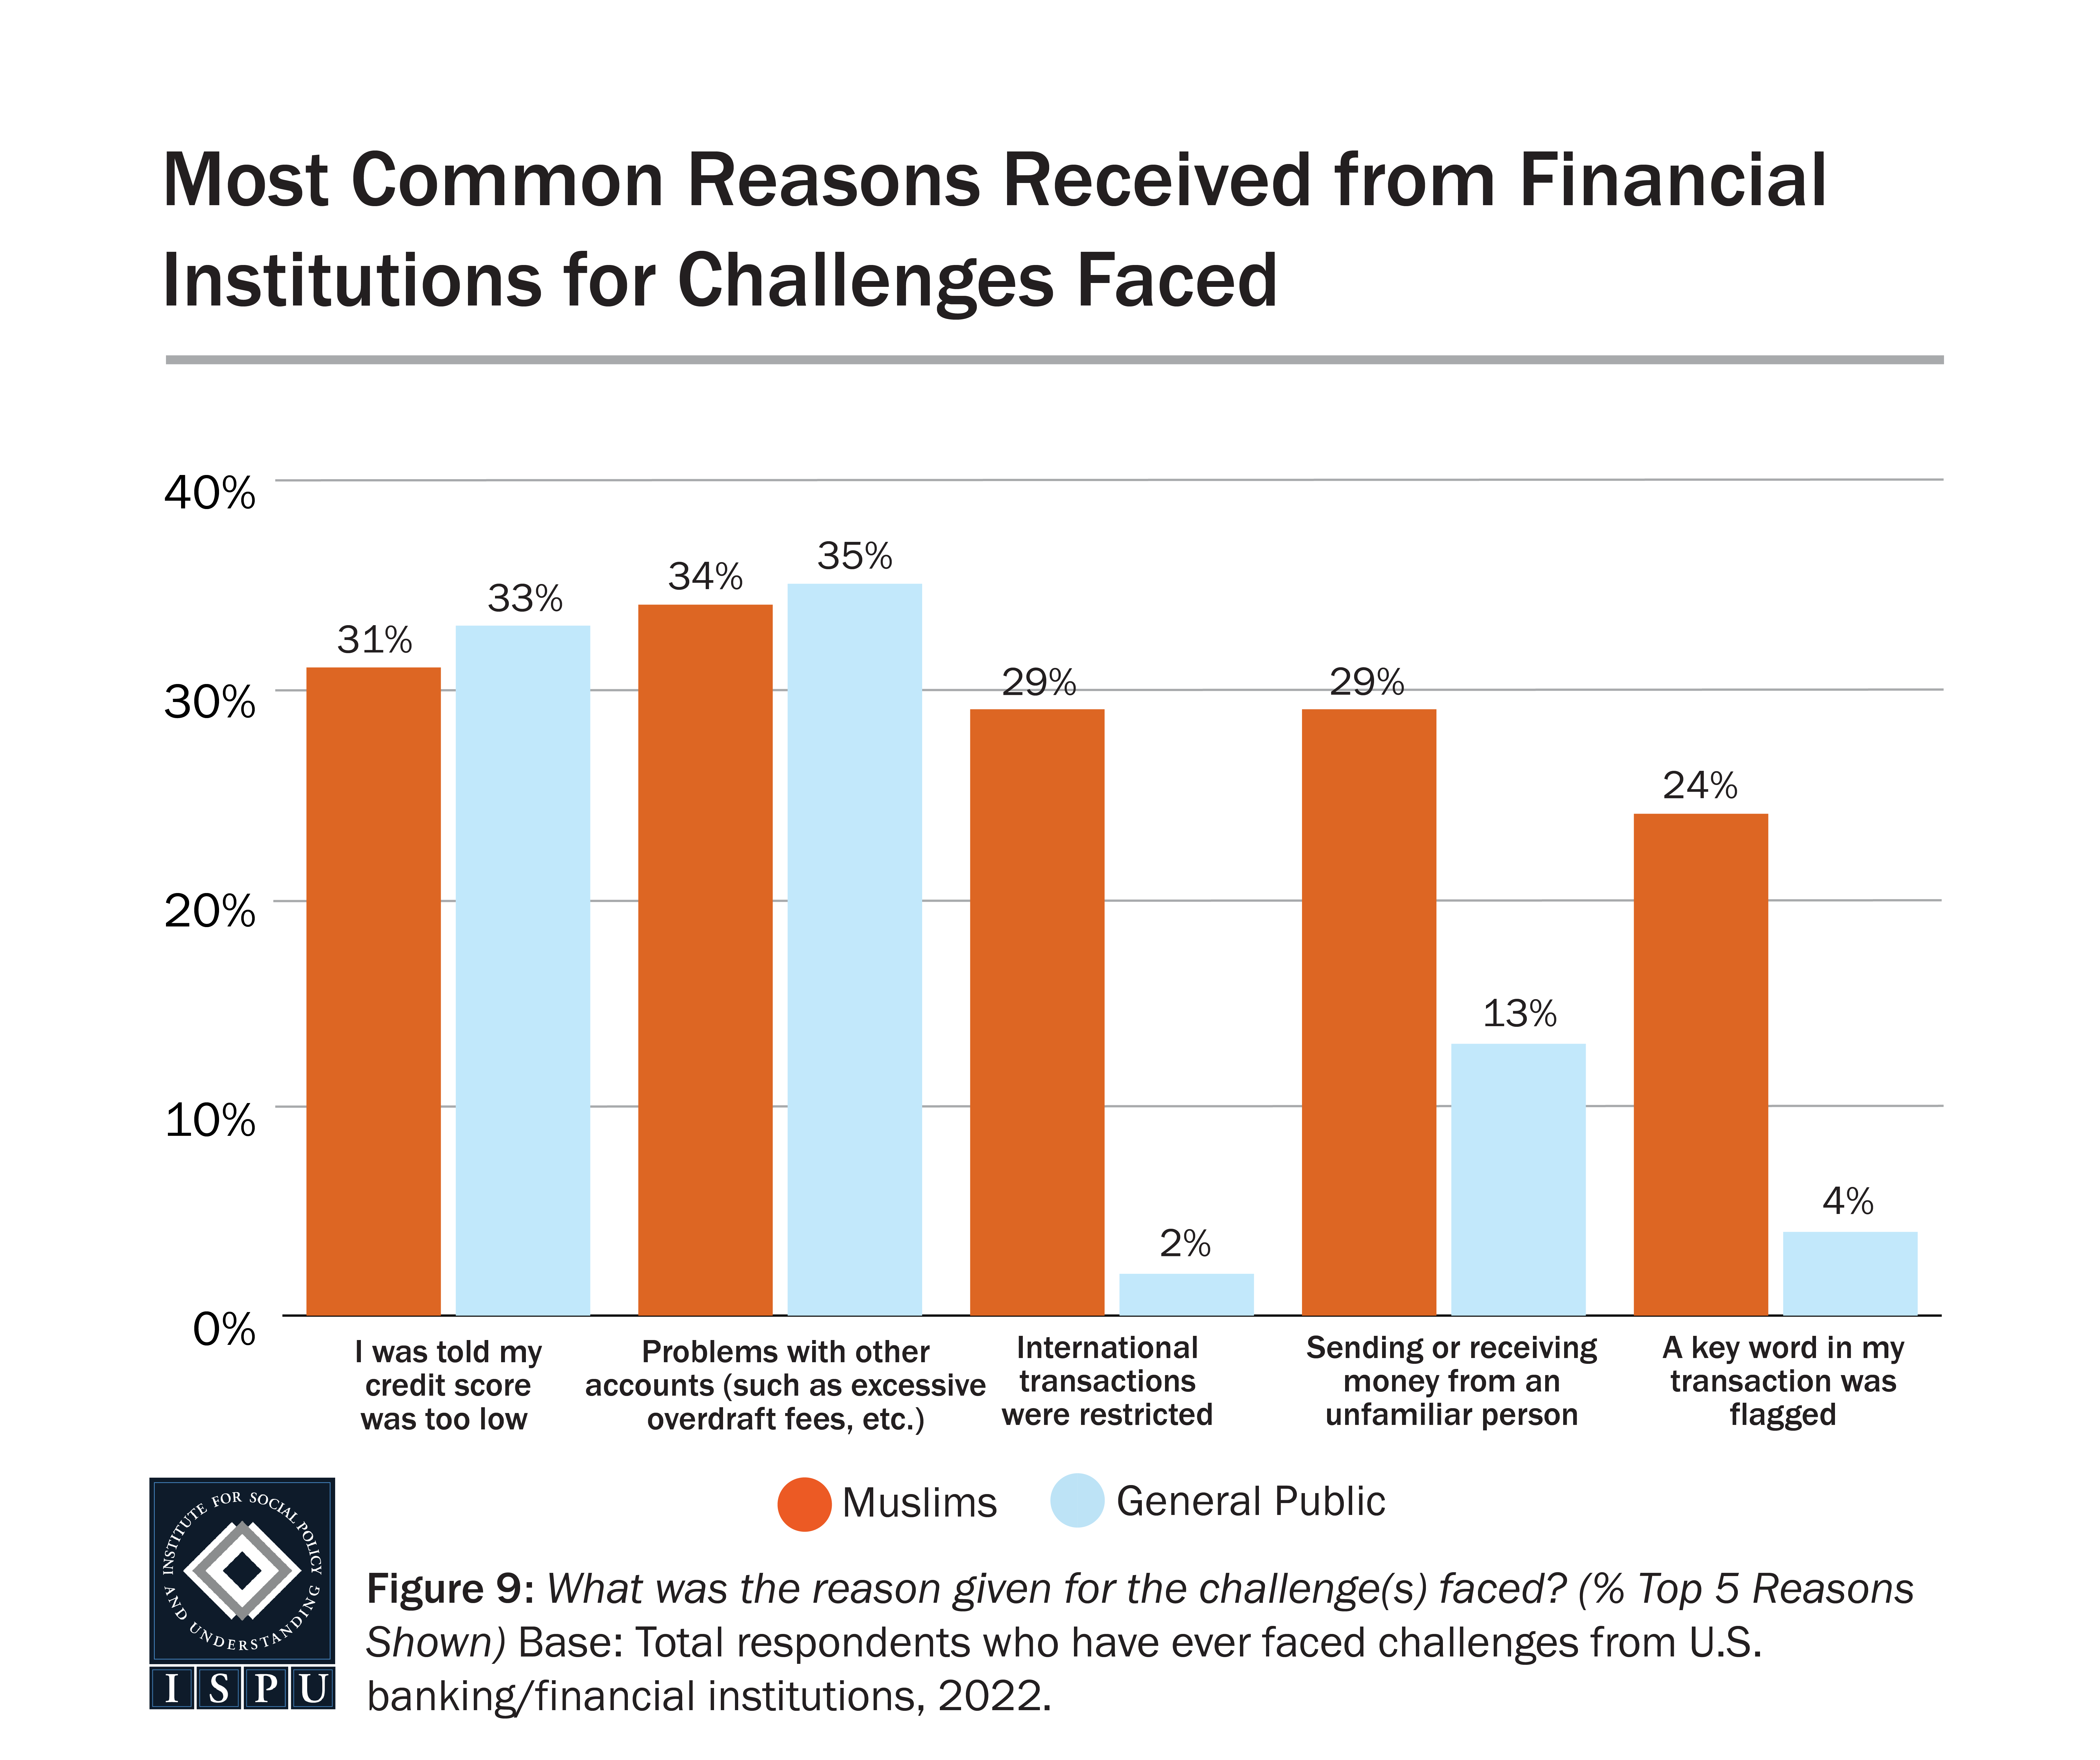 A bar graph showing the most common reasons Muslims and the general public received from financial institutions for challenges they faced.